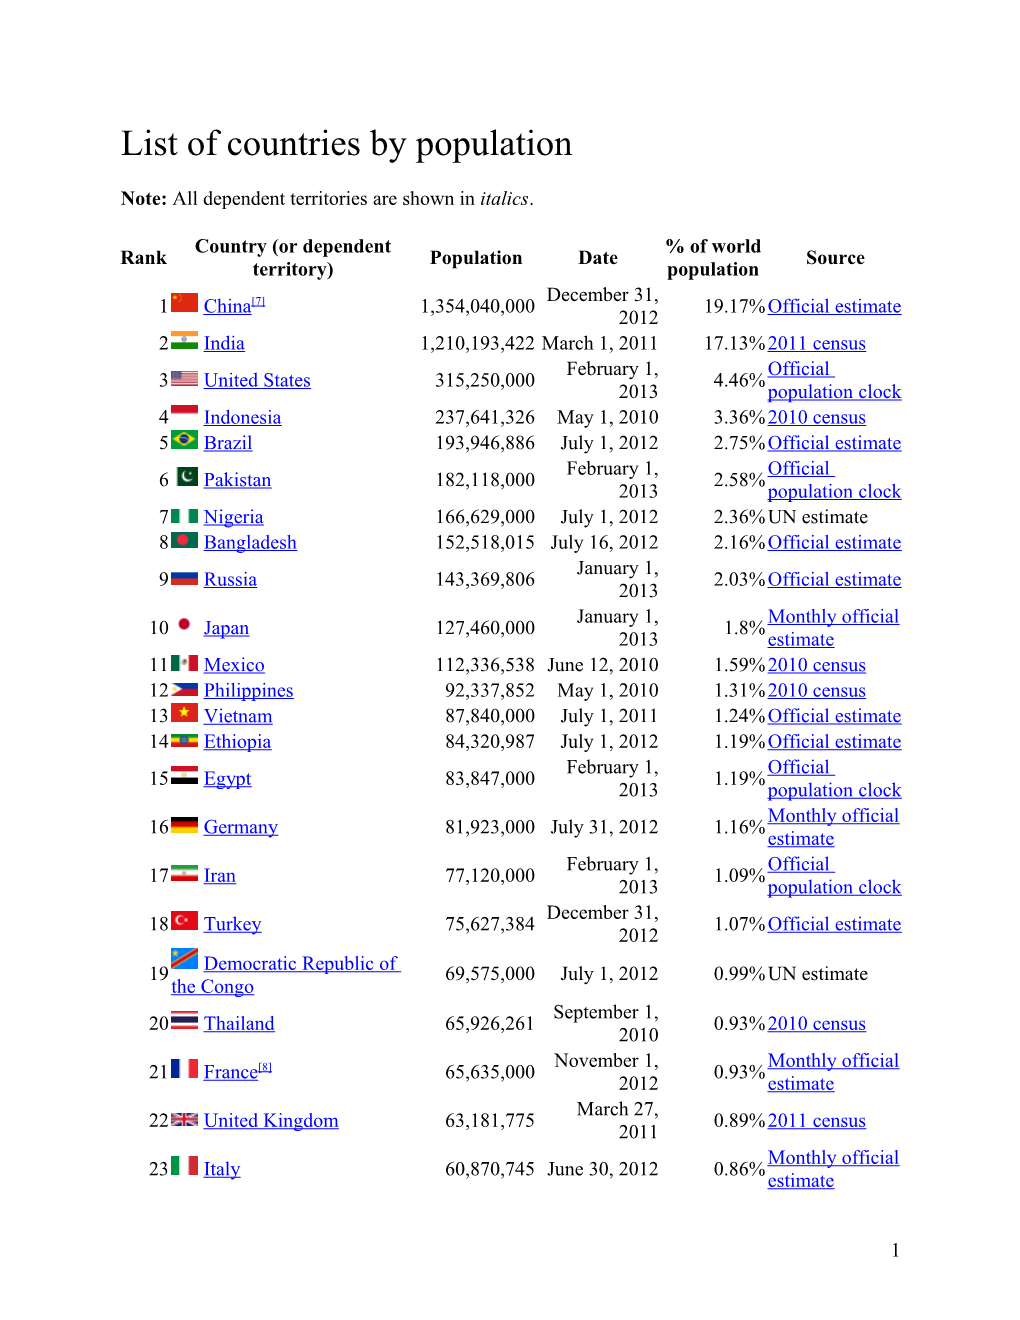 List of Countries by Population